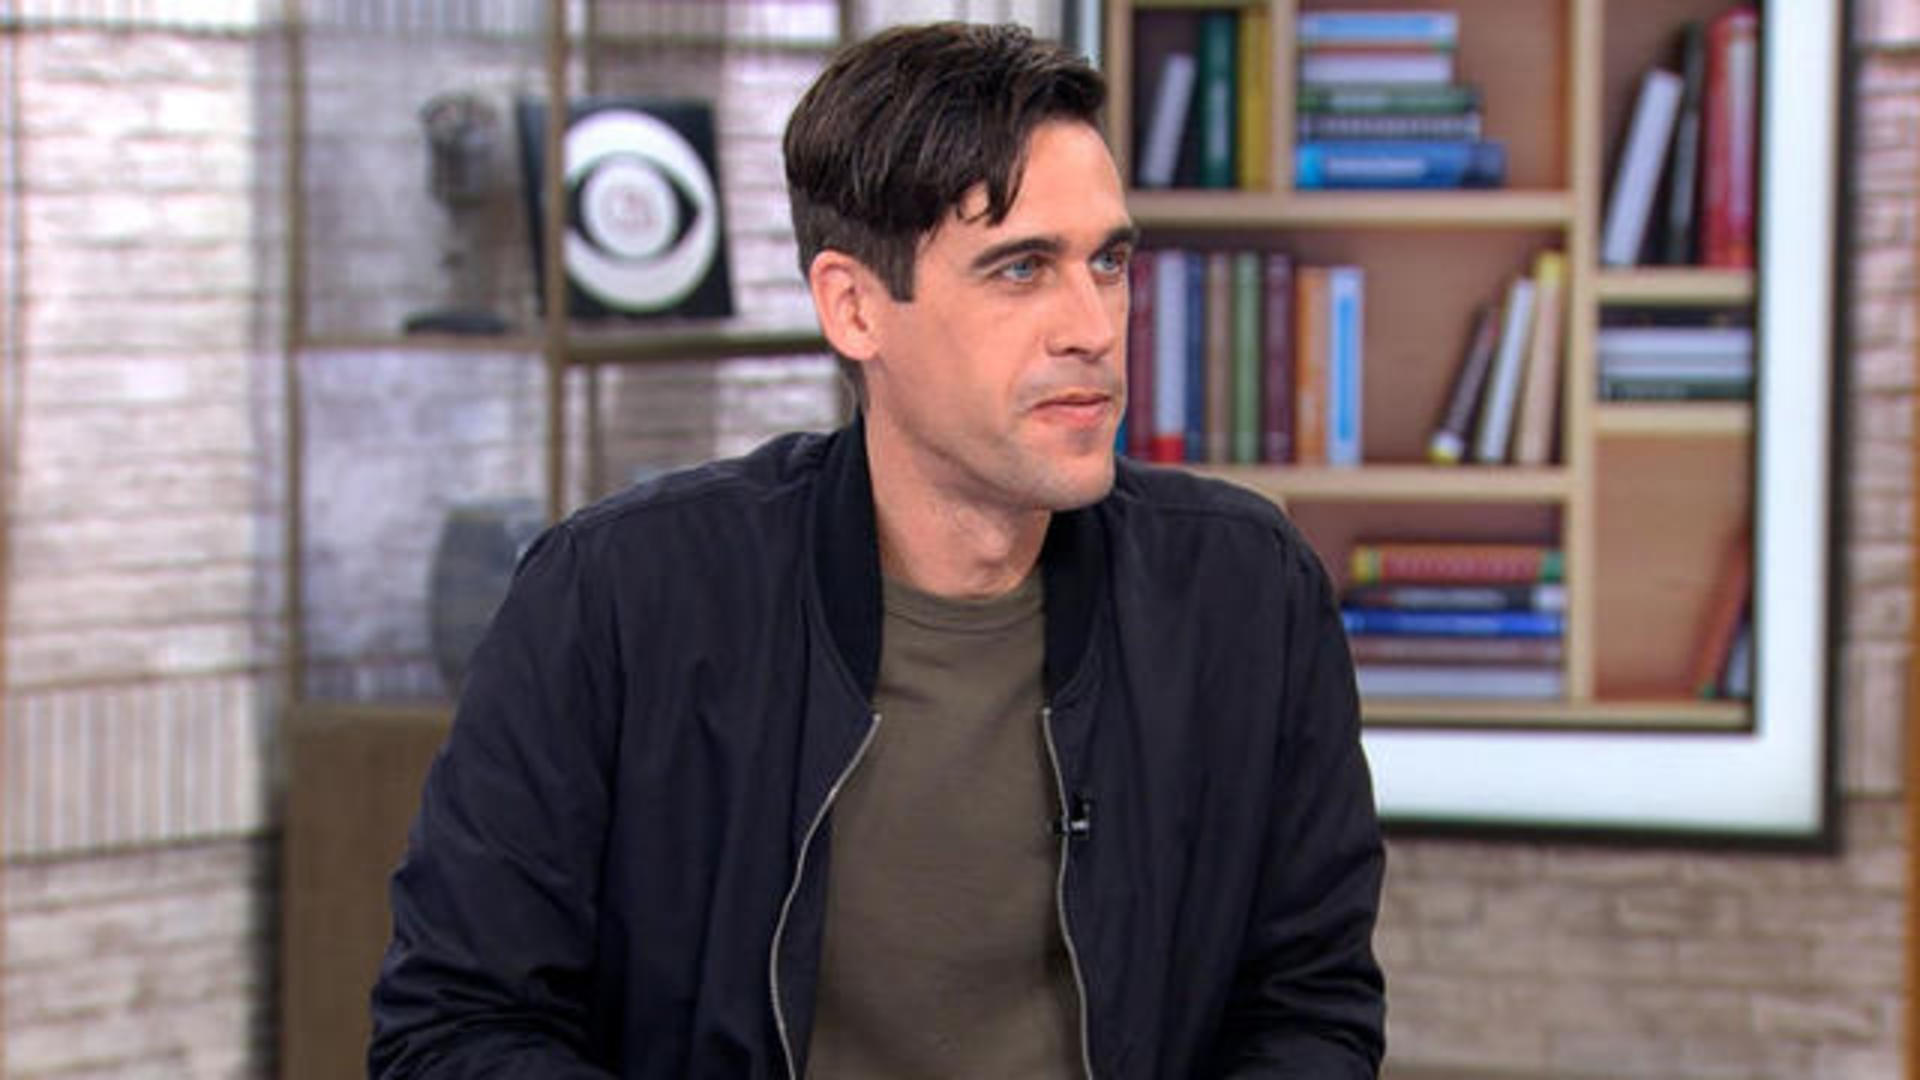 Bestselling philosopher Ryan Holiday offers advice and wisdom for